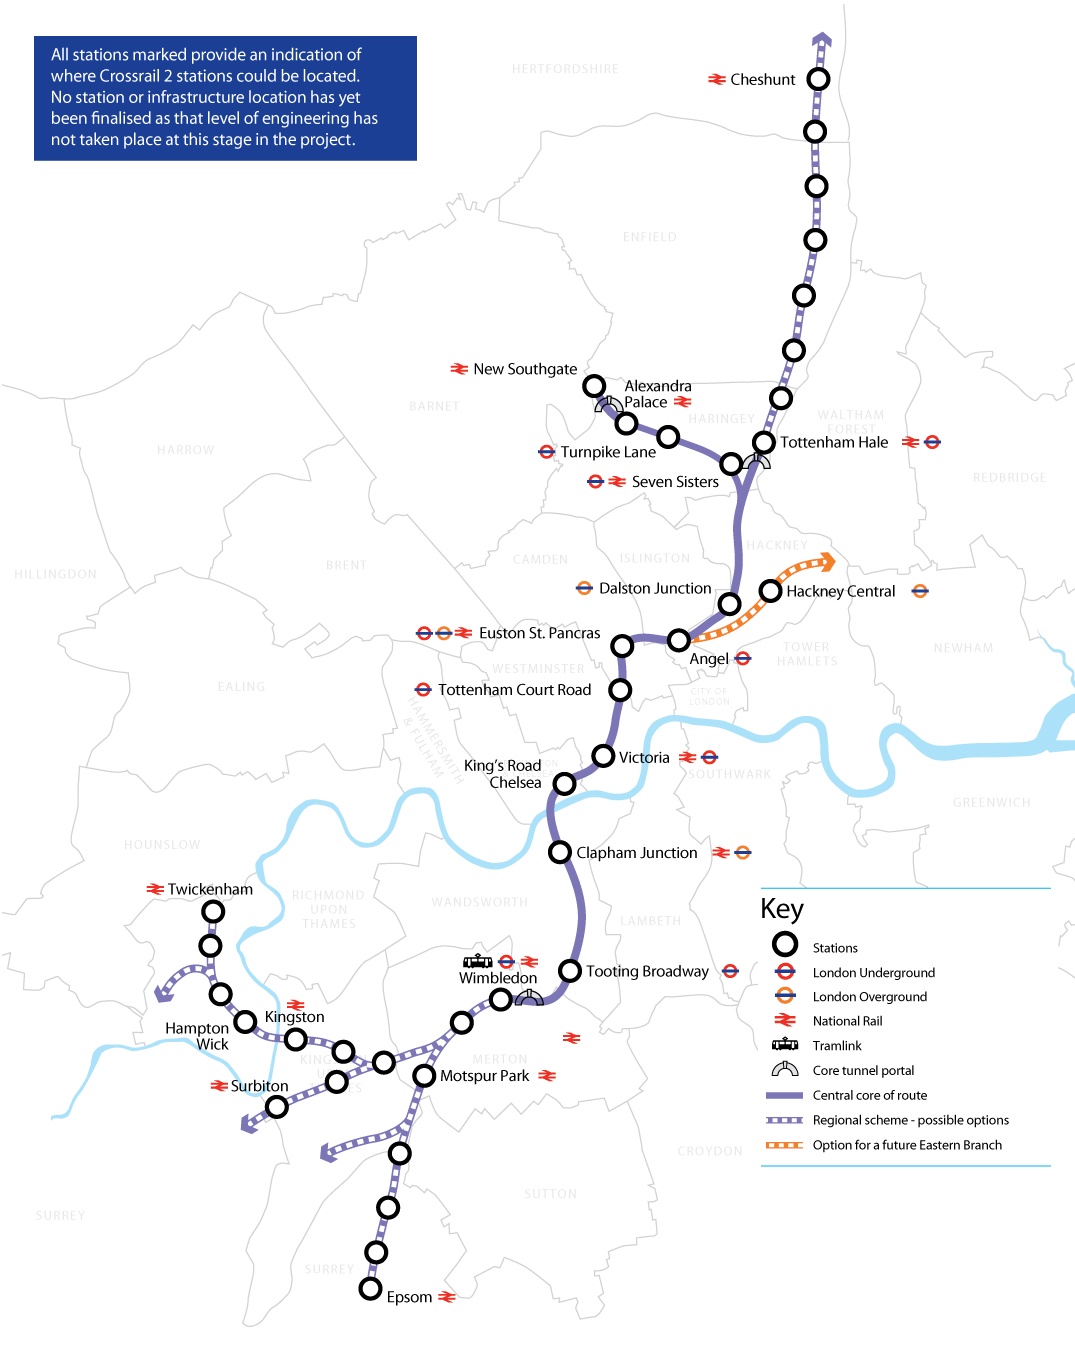 TfL appoints consulting groups to develop Crossrail 2 plans